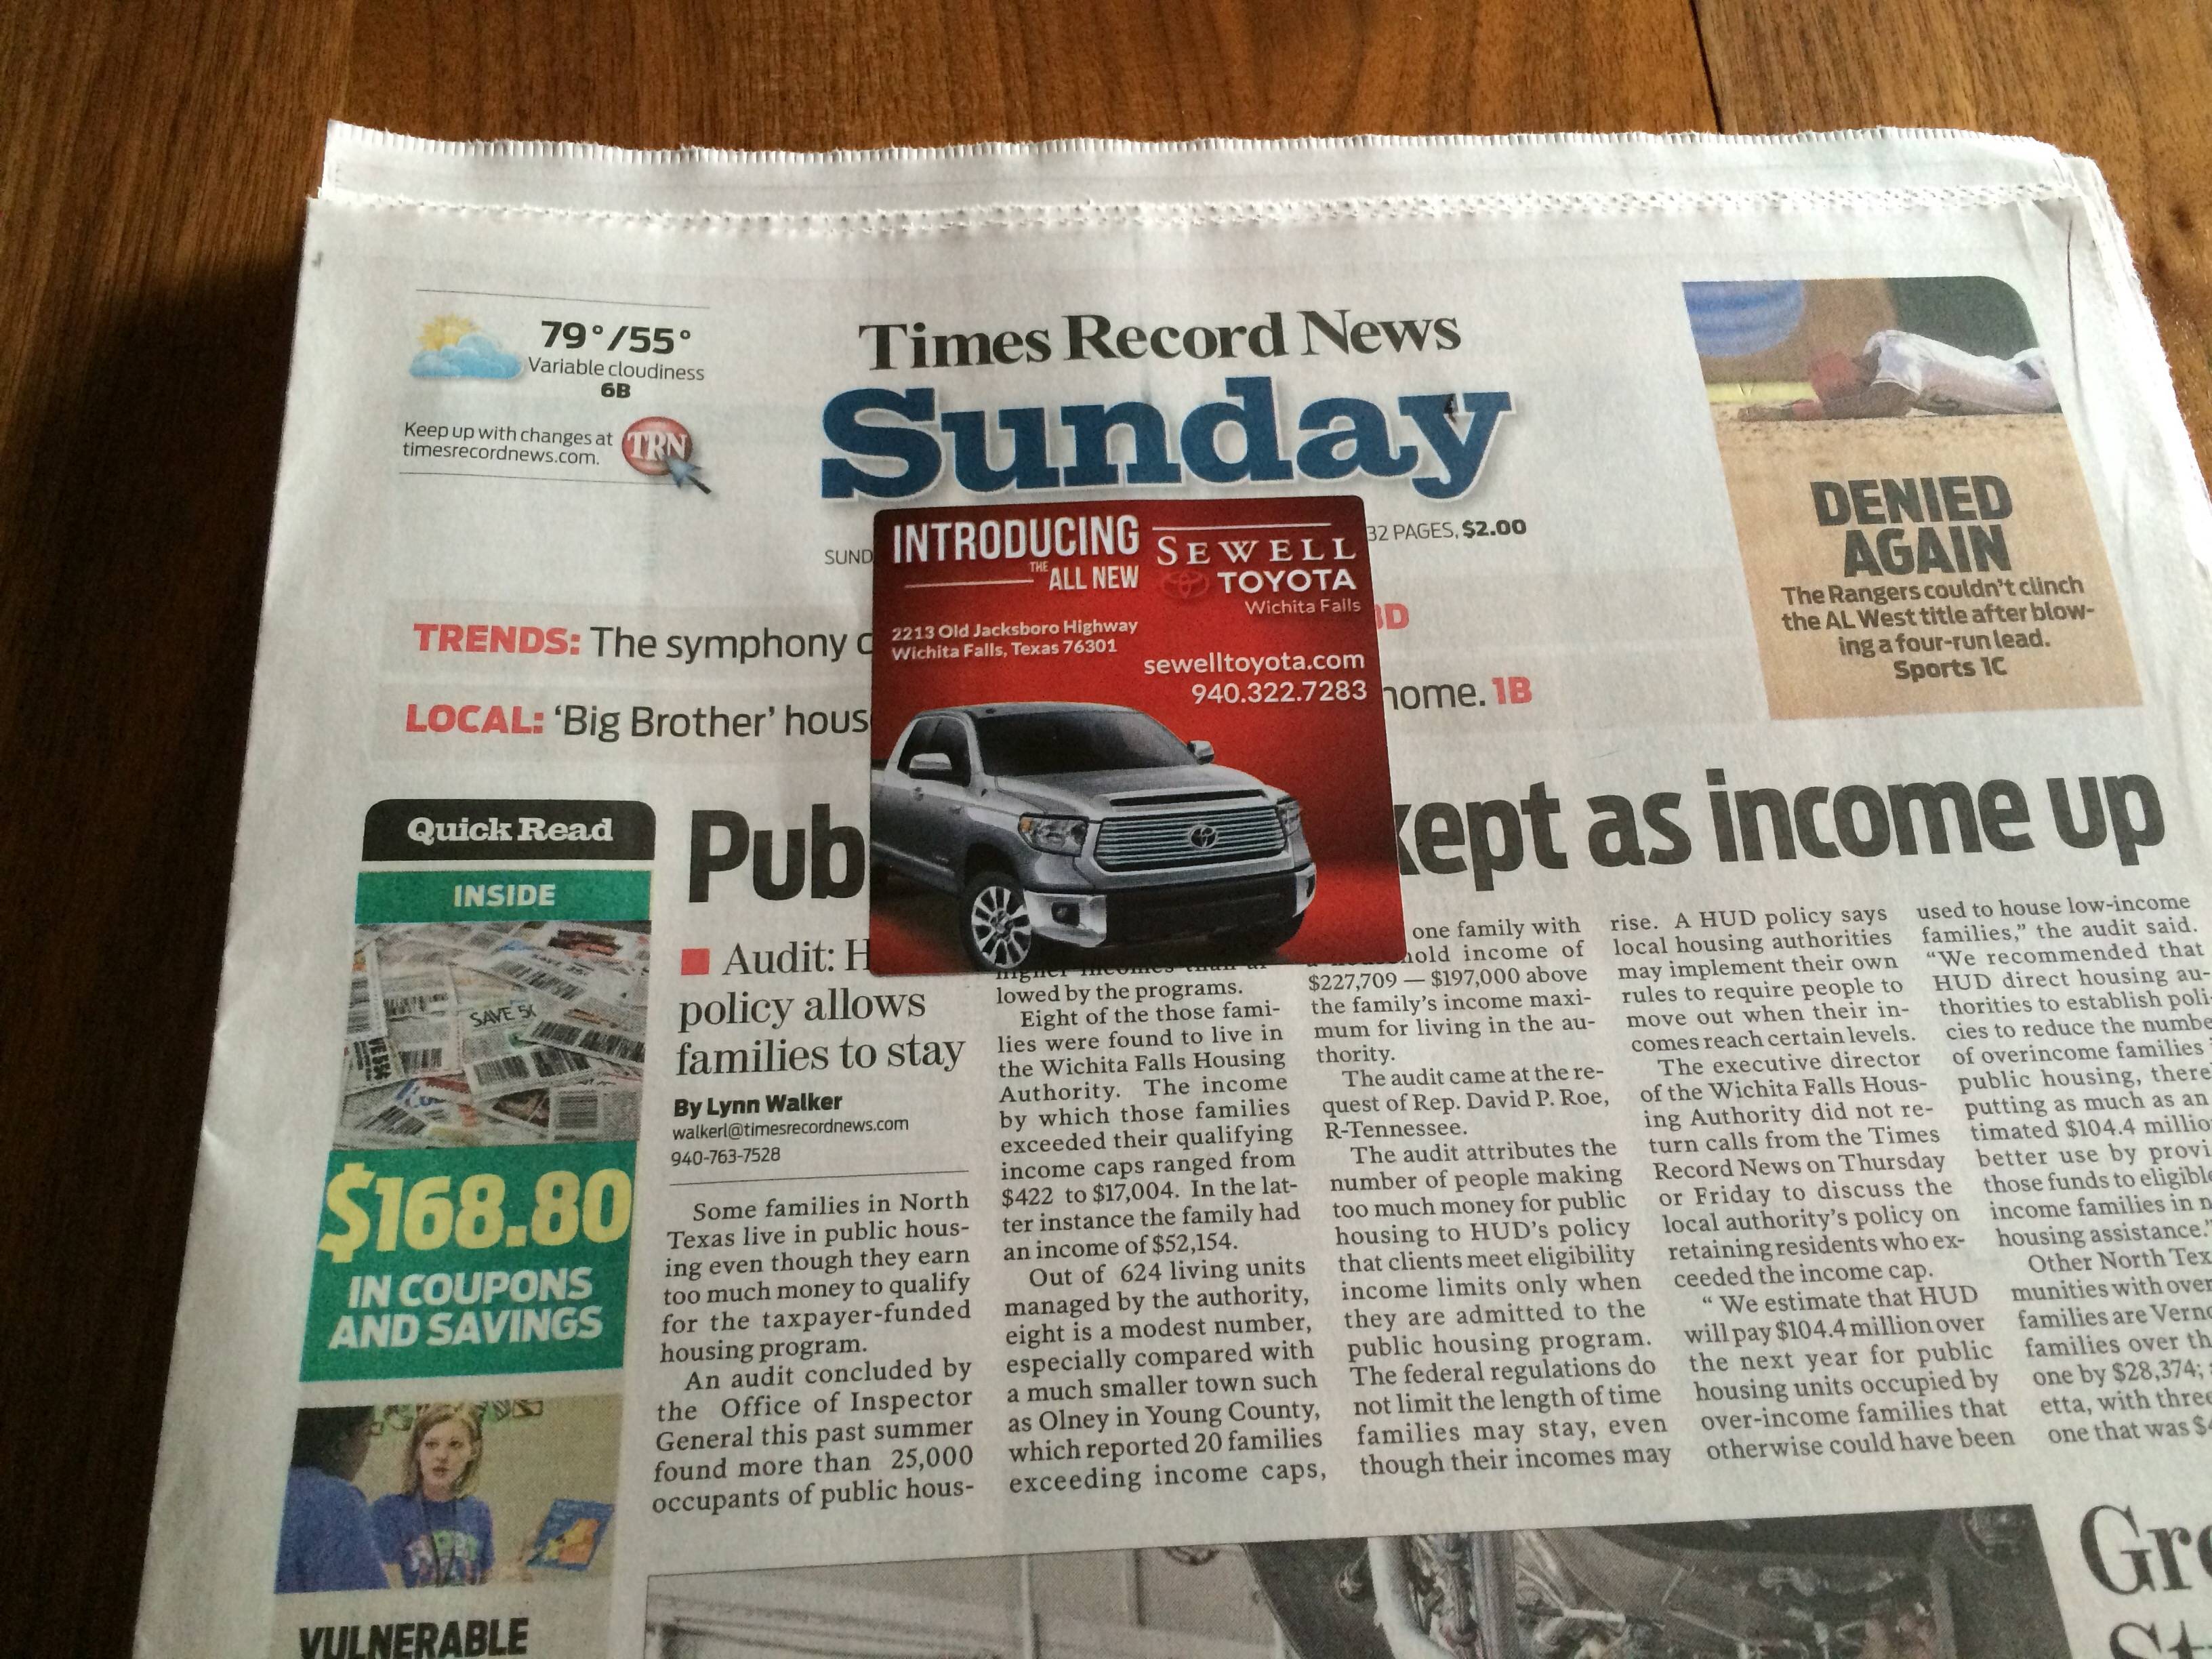 newspaper - 79"55 Times Record News Pe Sunday Introducing Se No Se We Es. All New Denied Again Toyota Trends The symphony Local 'Big Brother' hous sewelltoyota.com 940 3227283 home. 18 The Danger w inds the Al West infortunad Sports Vc Quick Rend Quick Re